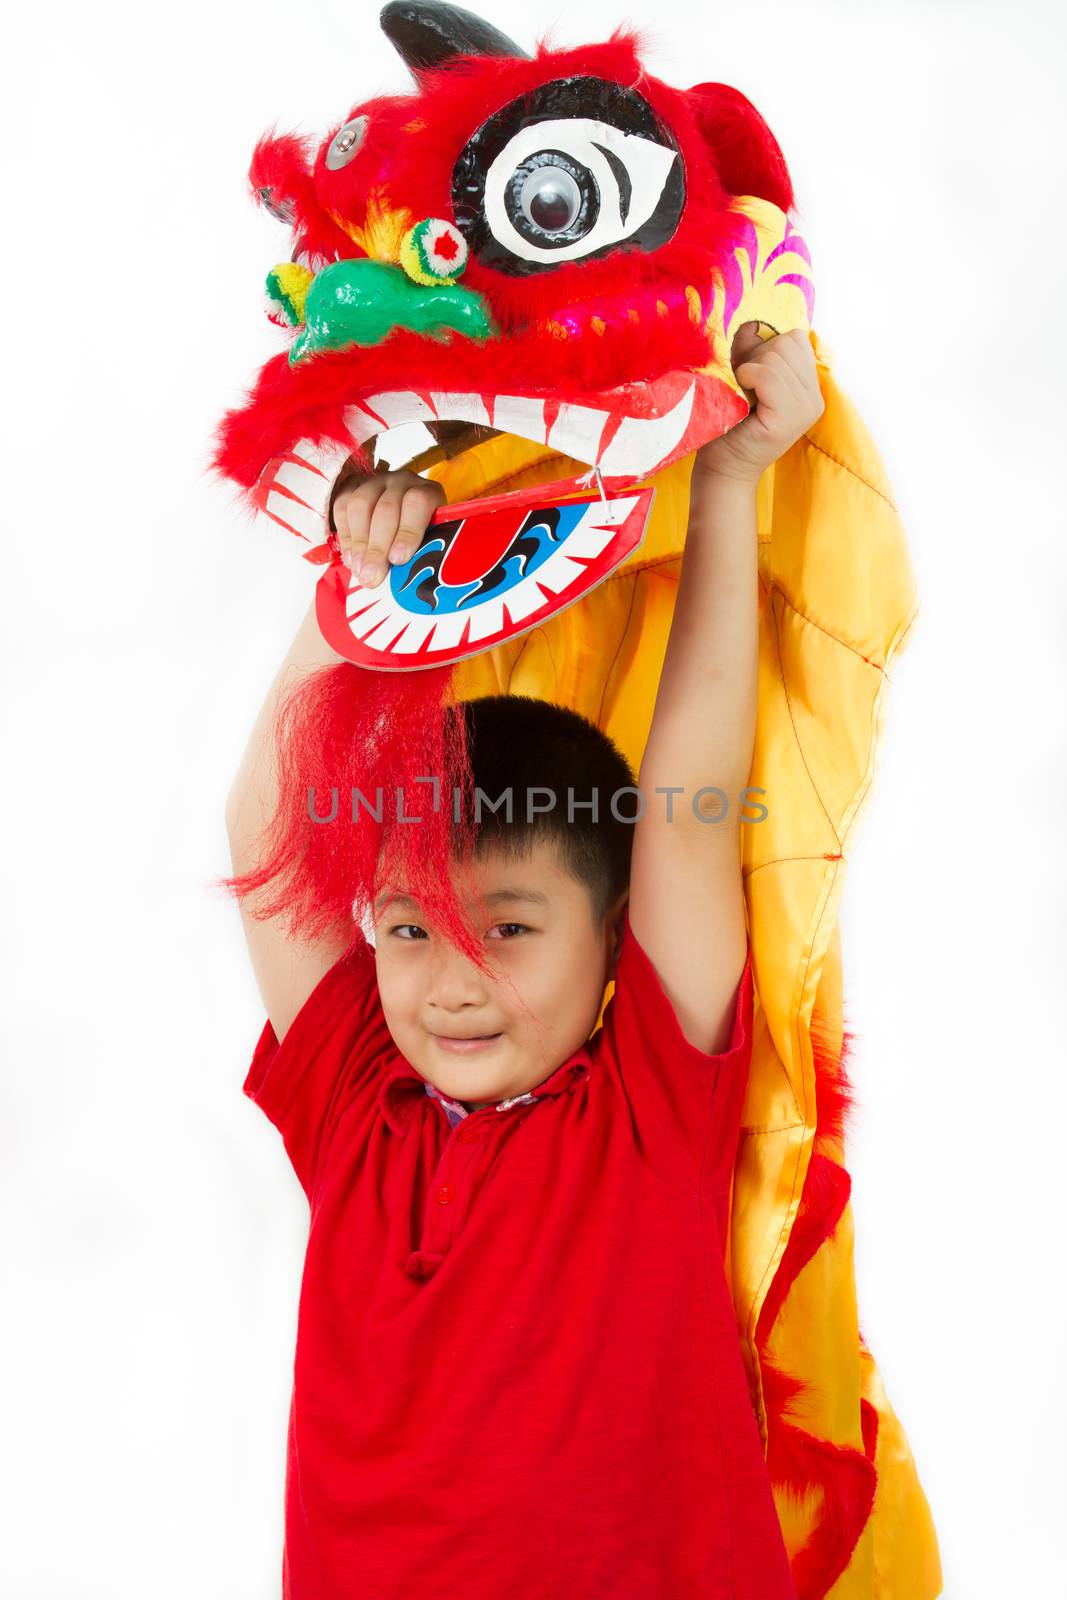 Asian Little Boy in Chinese Lion Custome Dance During Chinese New Year Celebration on White Background